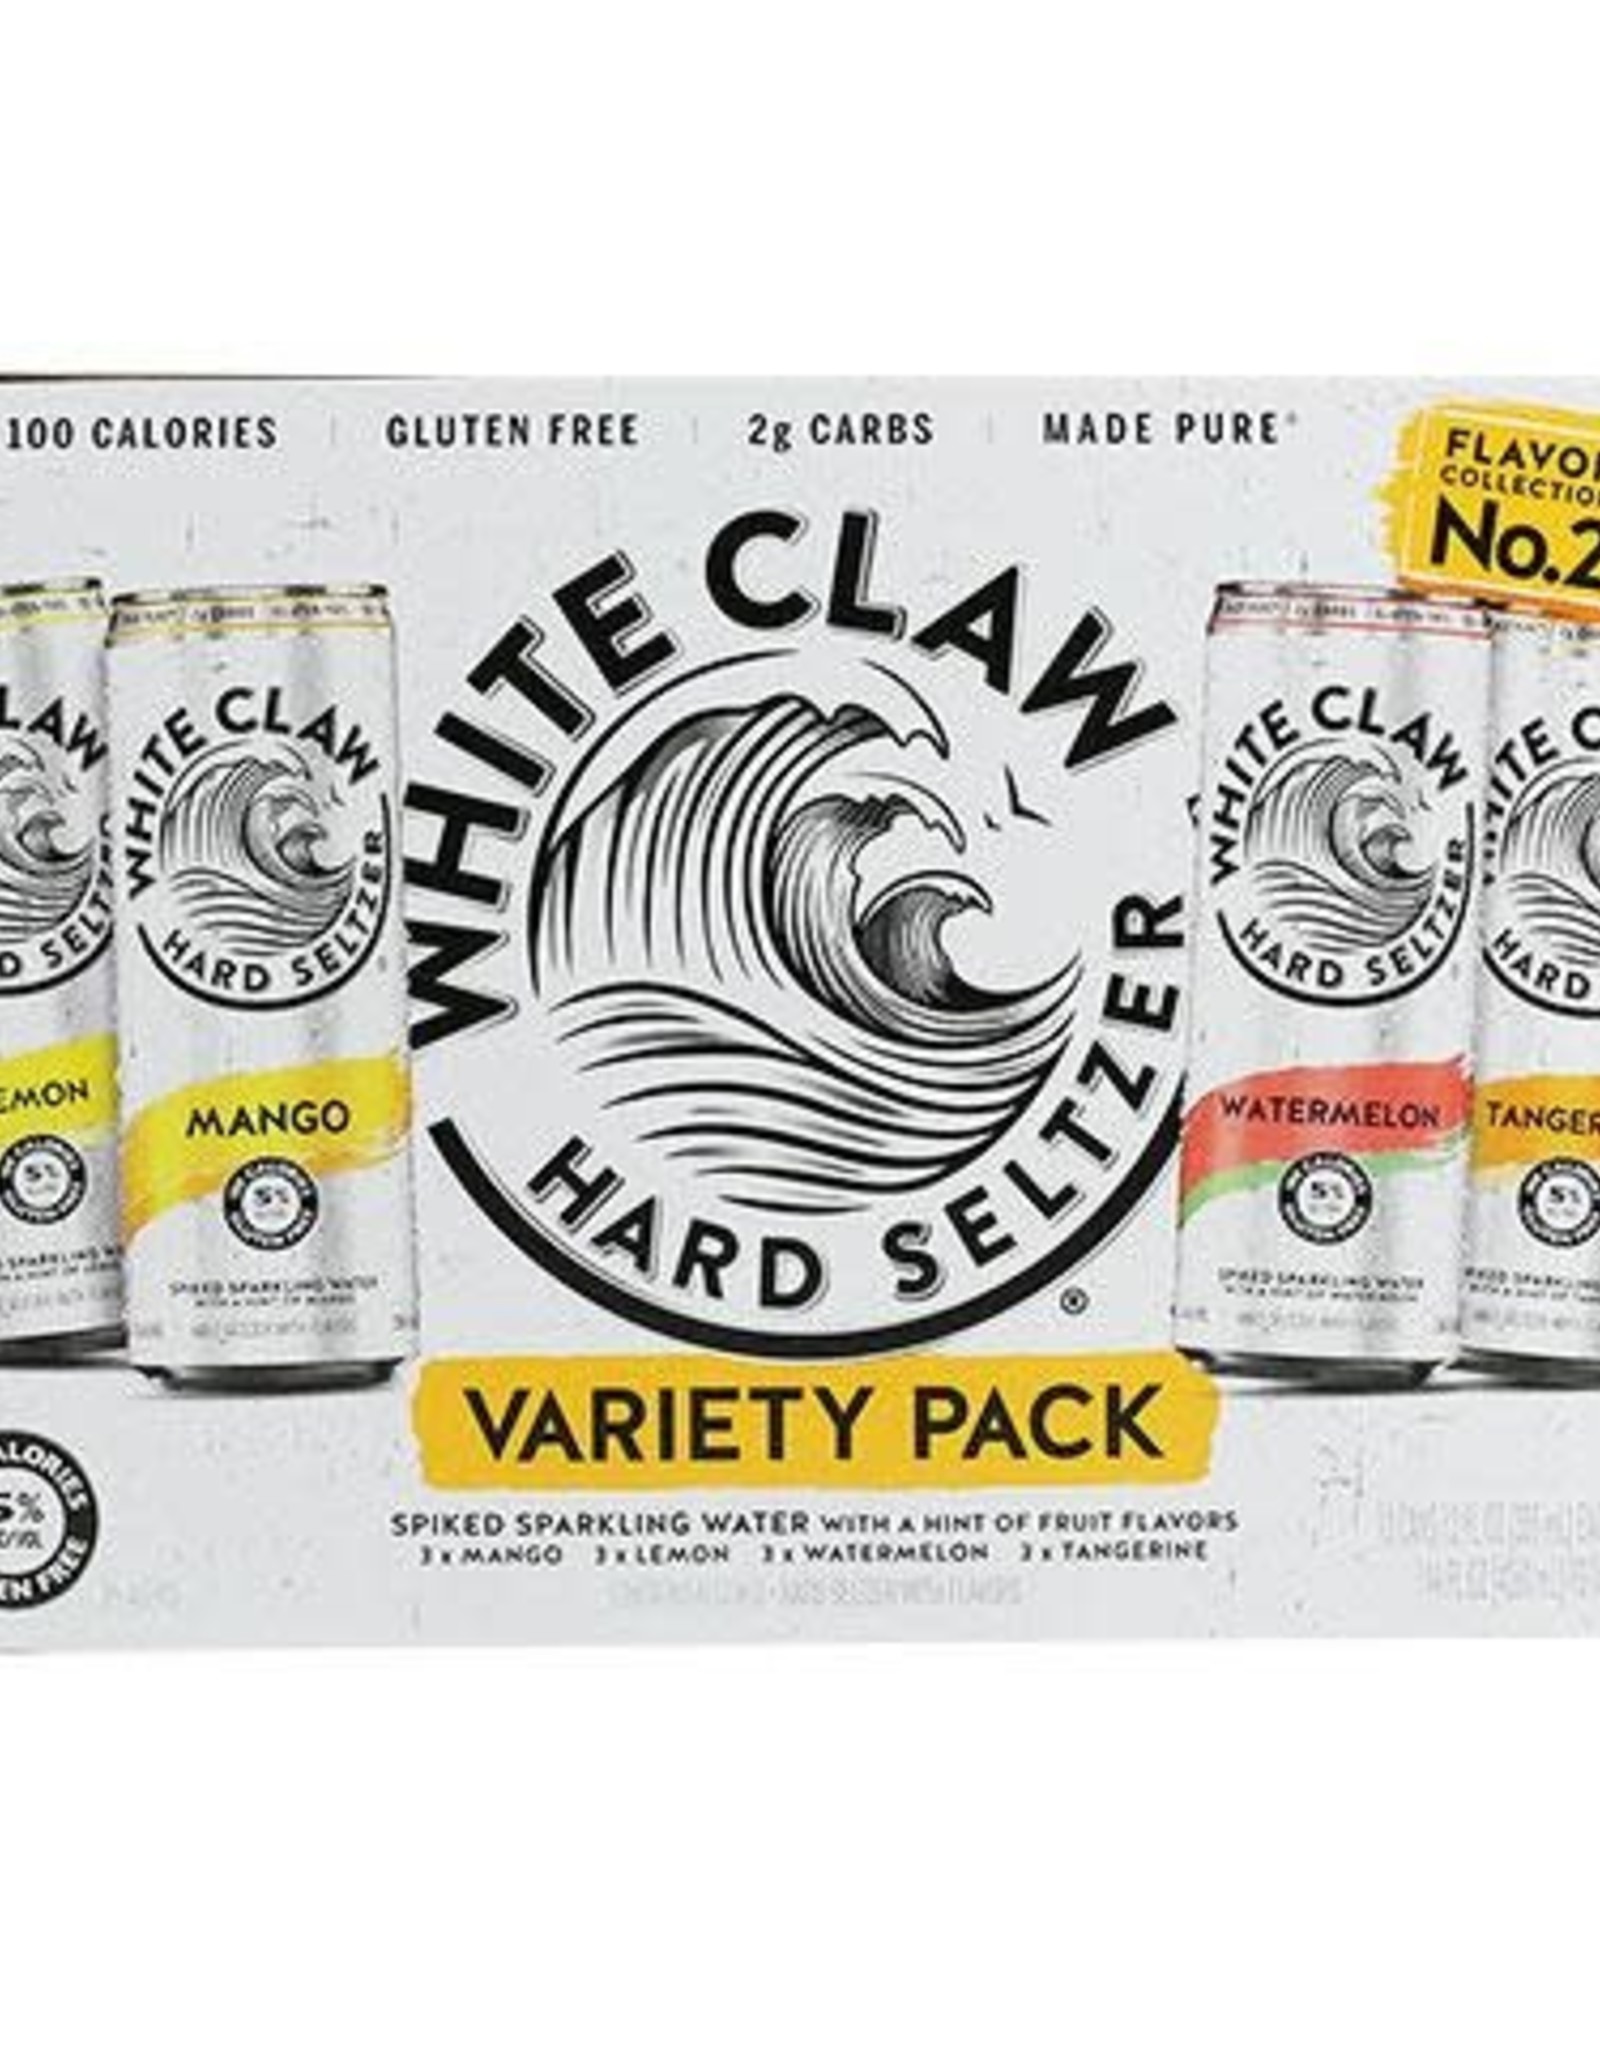 White Claw White Claw - Variety Pack #2 - 12pk -12oz - Cans